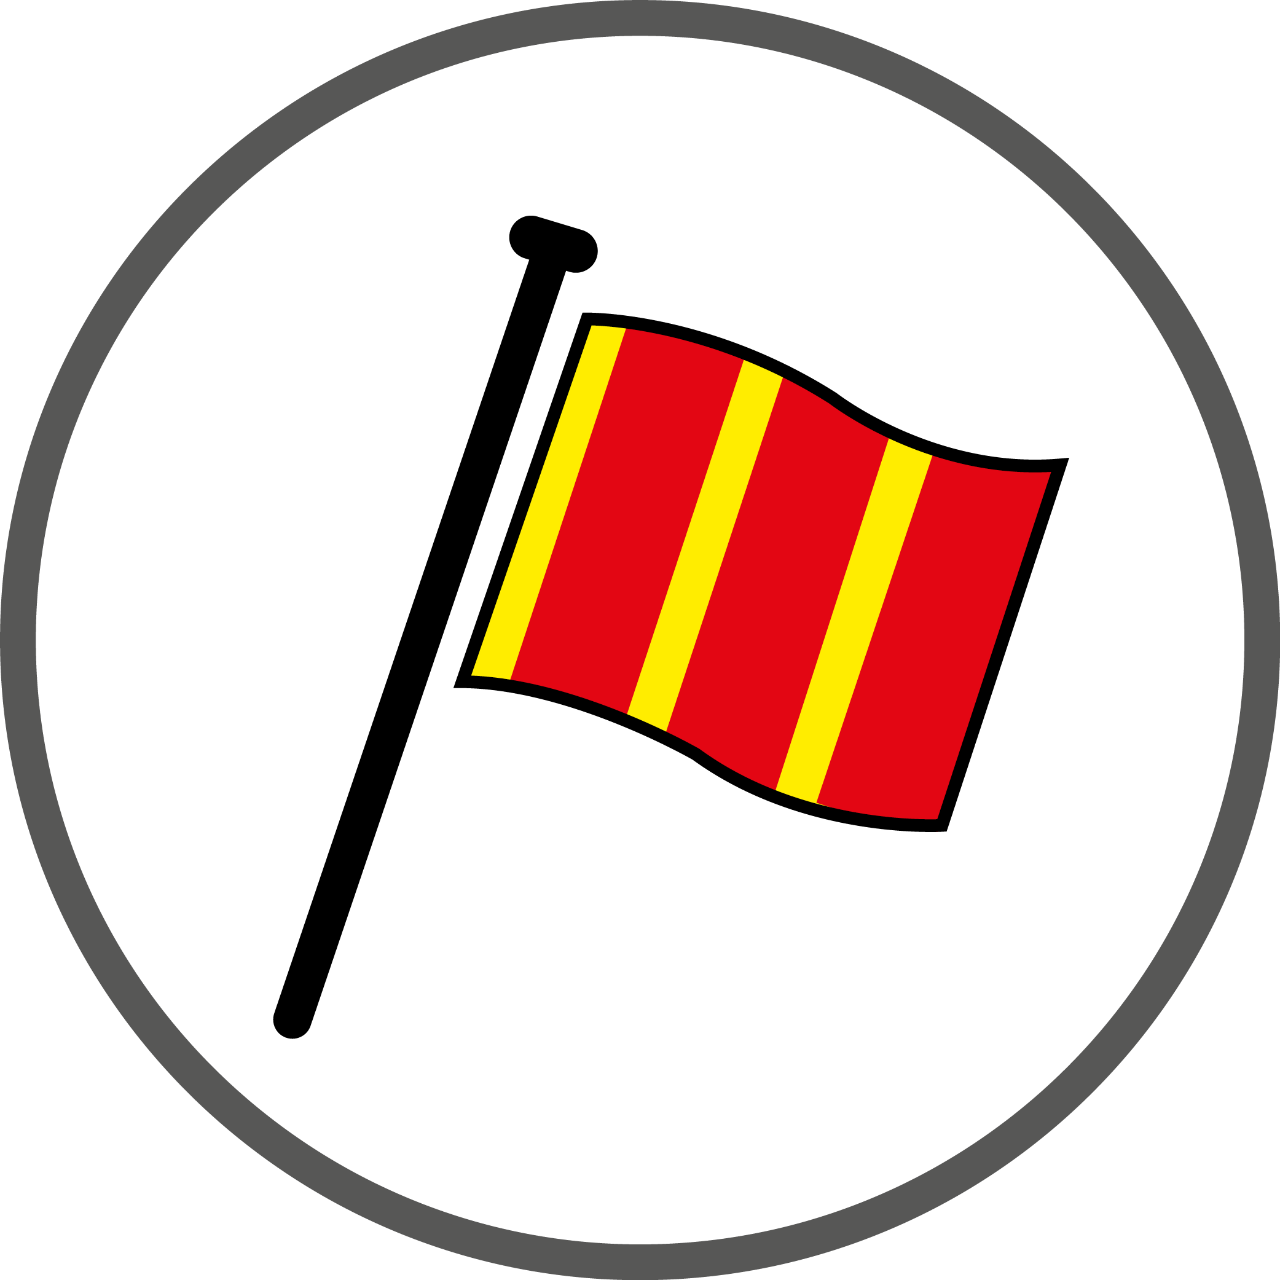 Red and yellow track day flag icon